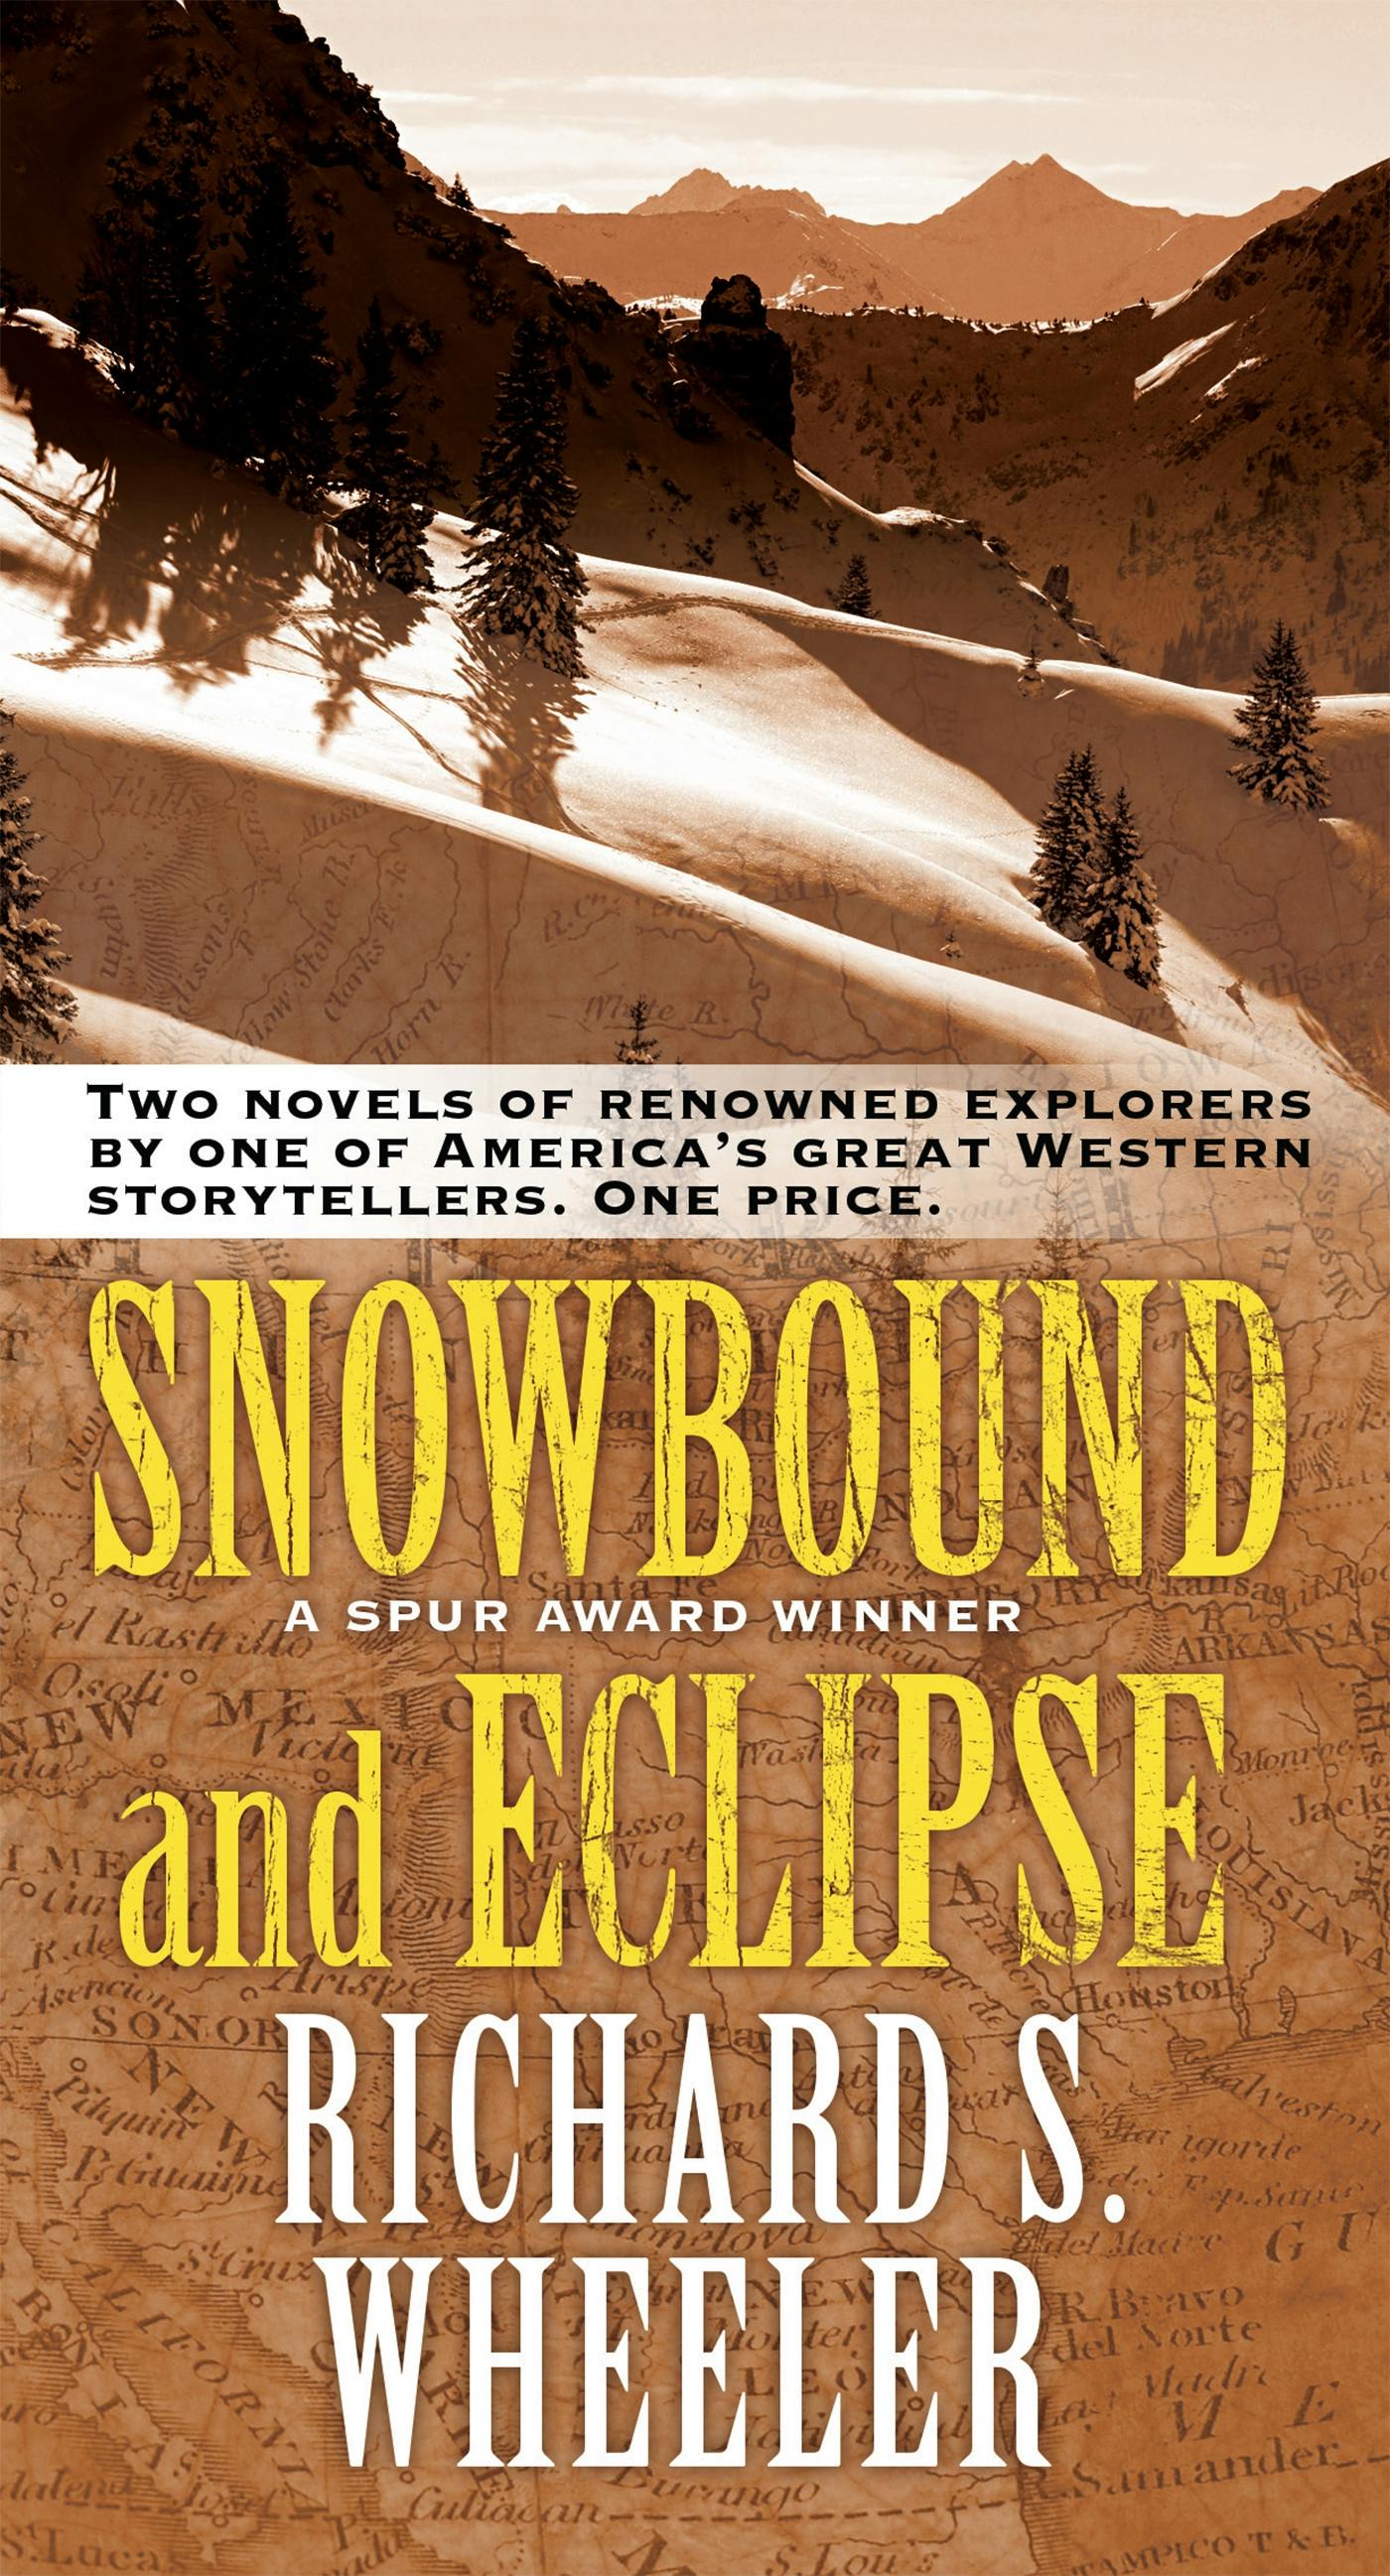 Cover for the book titled as: Snowbound and Eclipse